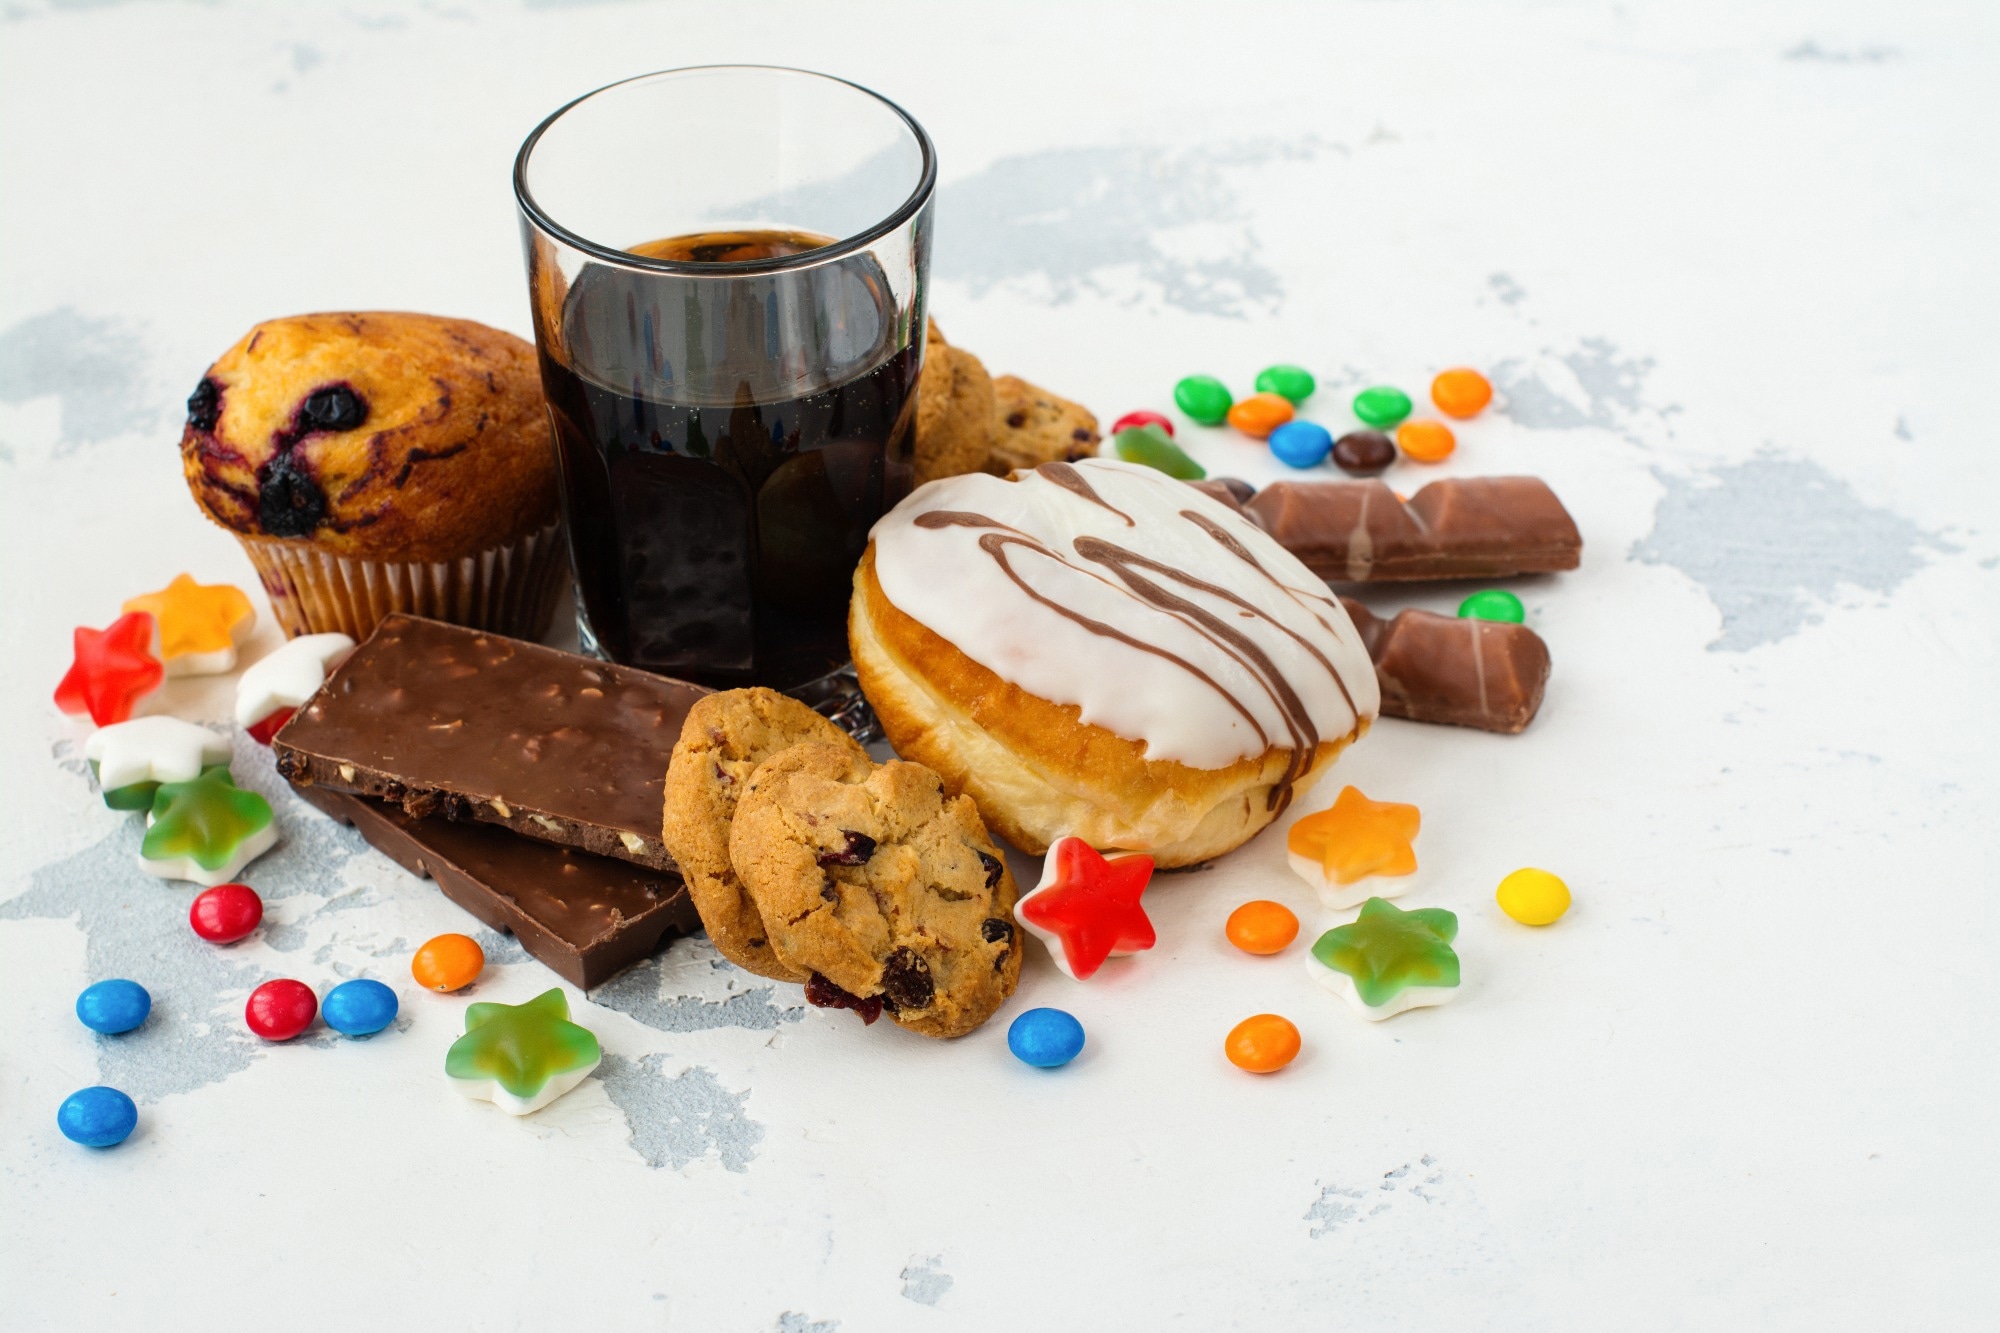 Study: Global Impacts of Western Diet and Its Effects on Metabolism and Health: A Narrative Review. Image Credit: Ekaterina Markelova / Shutterstock.com